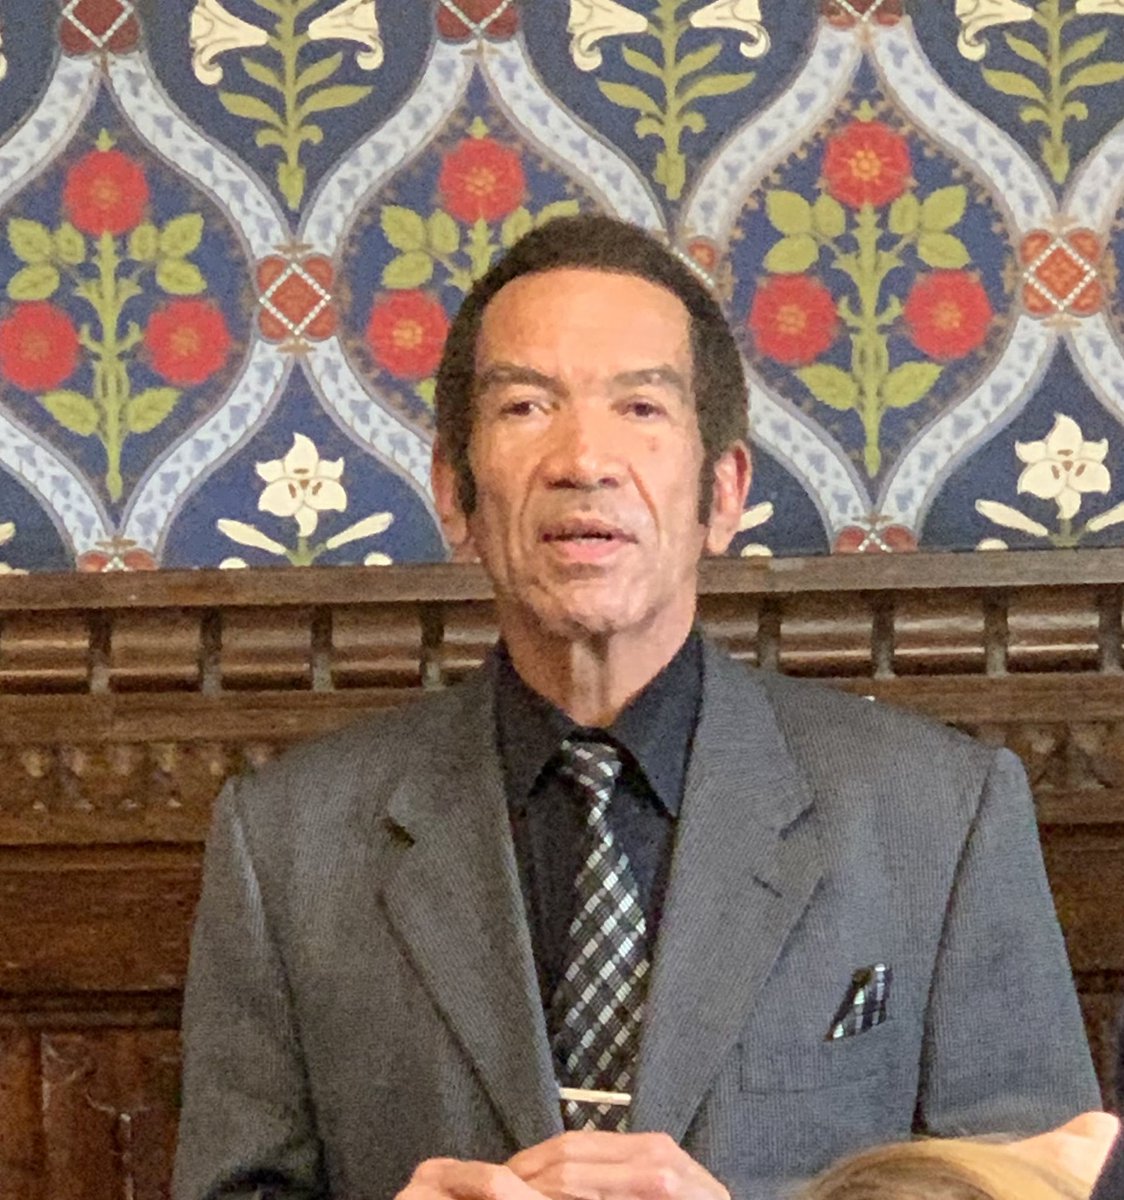 Pleased to meet President Khama today- Former President of Botswana who as President banned trophy hunting and over a ten- year period saw an increase in photo- tourism in his country #BanTrophyHuntingImports